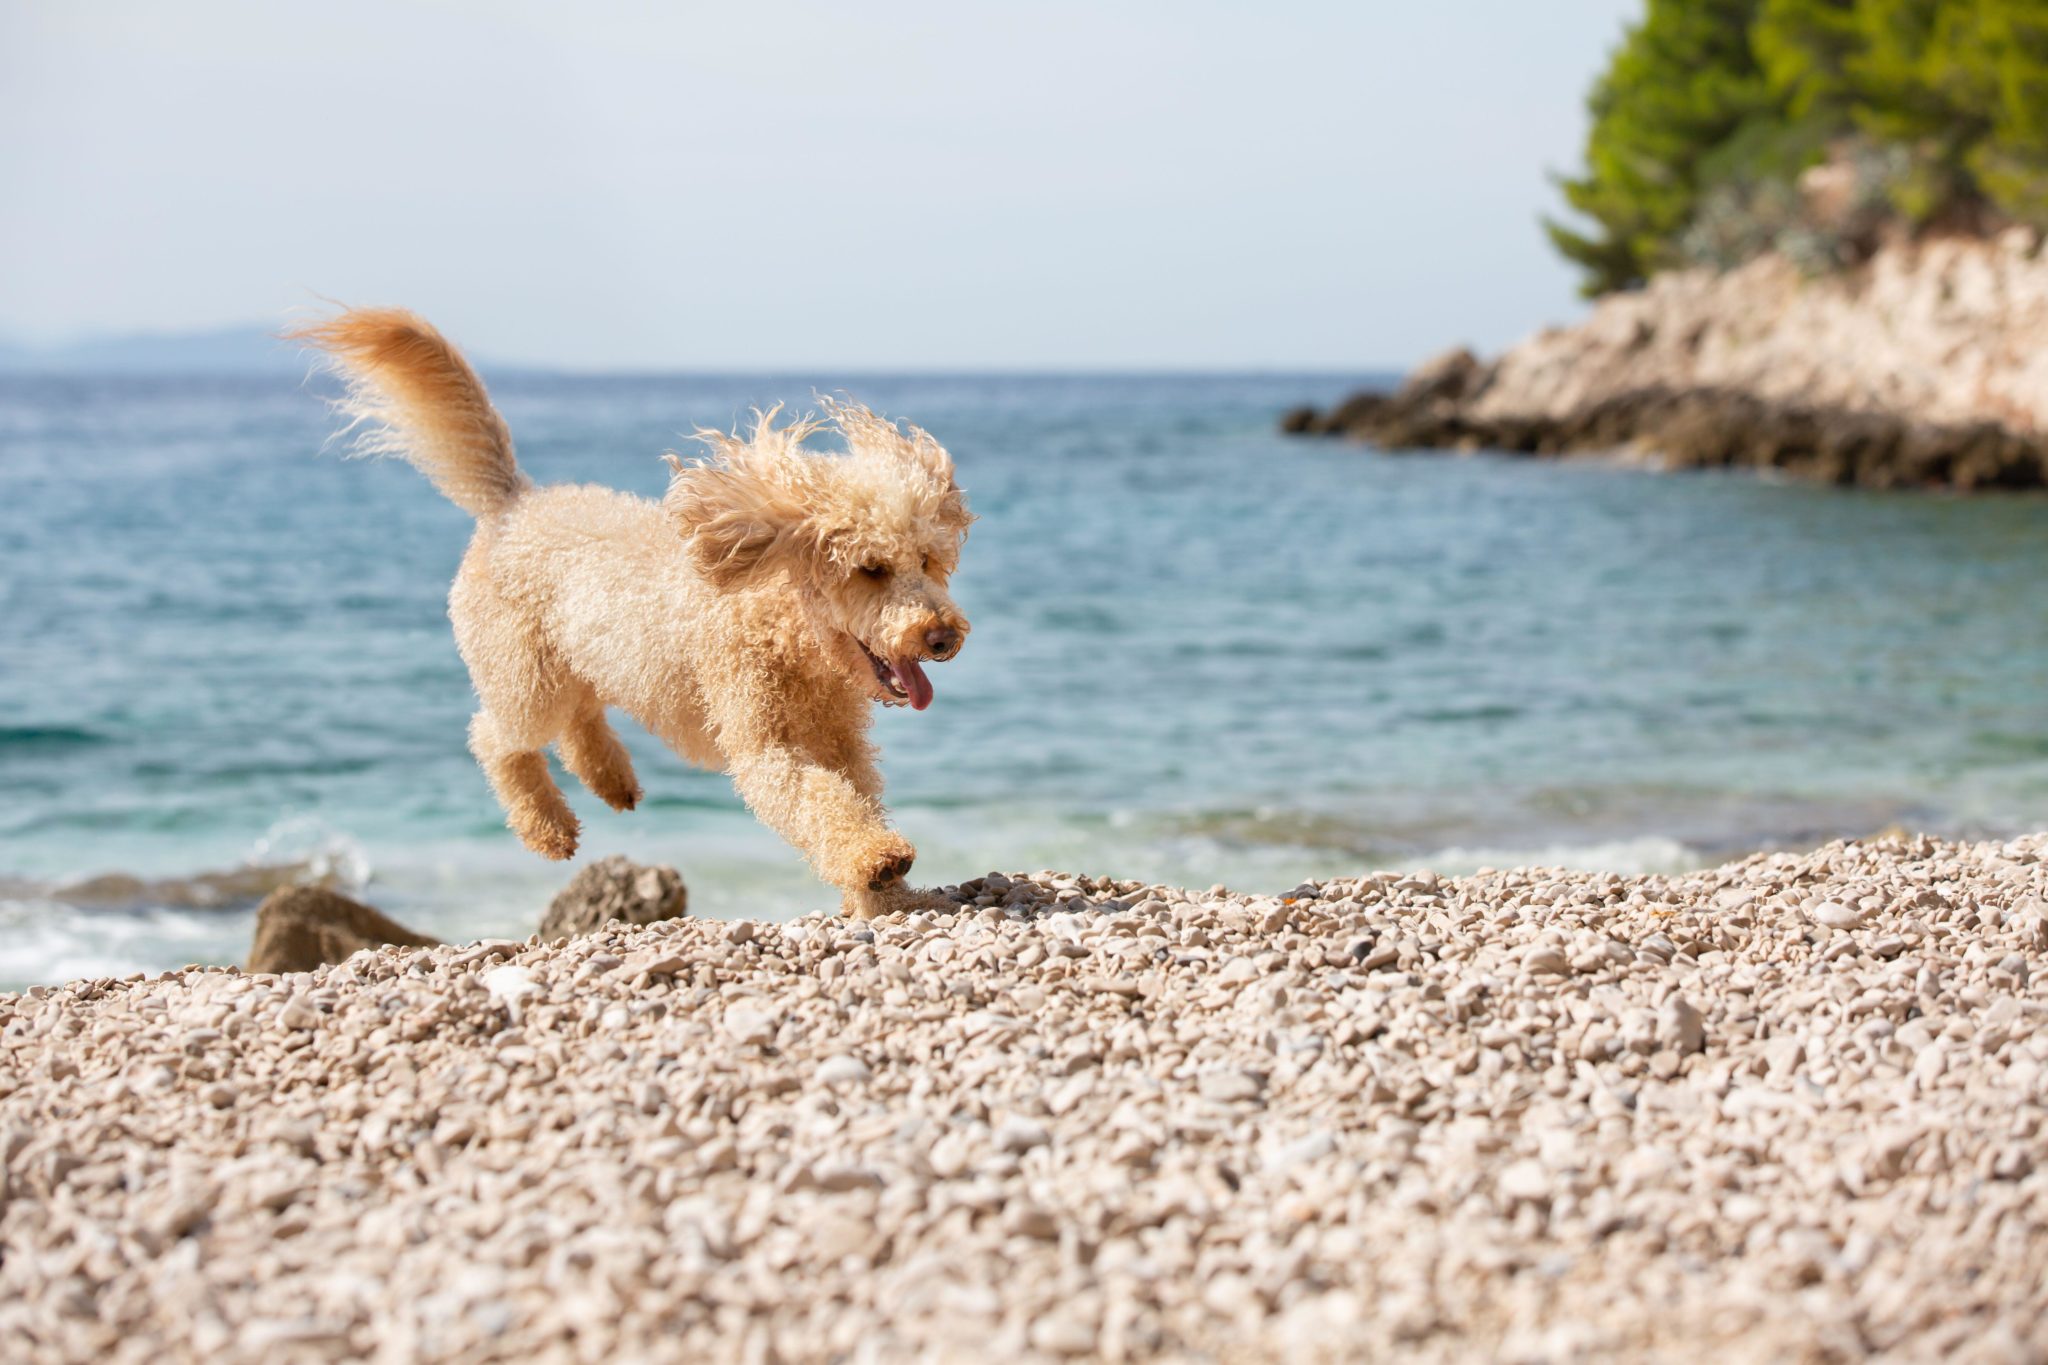 A young apricot poodle playing on the beach at Bol, Island Brac, Croatia. 